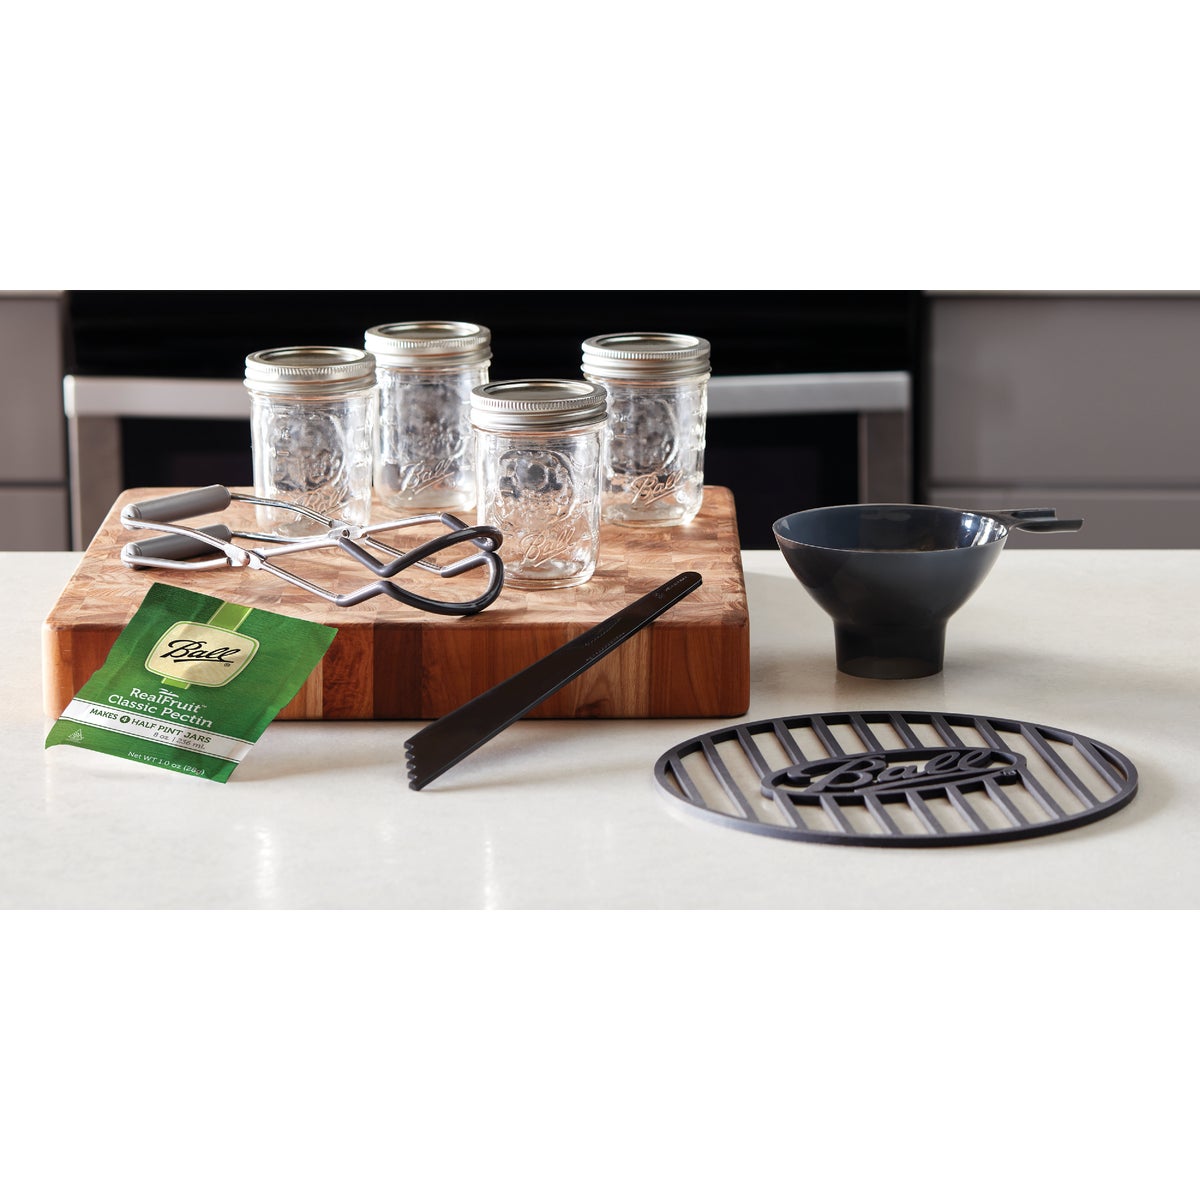 Item 625073, Ball Preserving Kit provides the ideal combination of ball jars, canning 